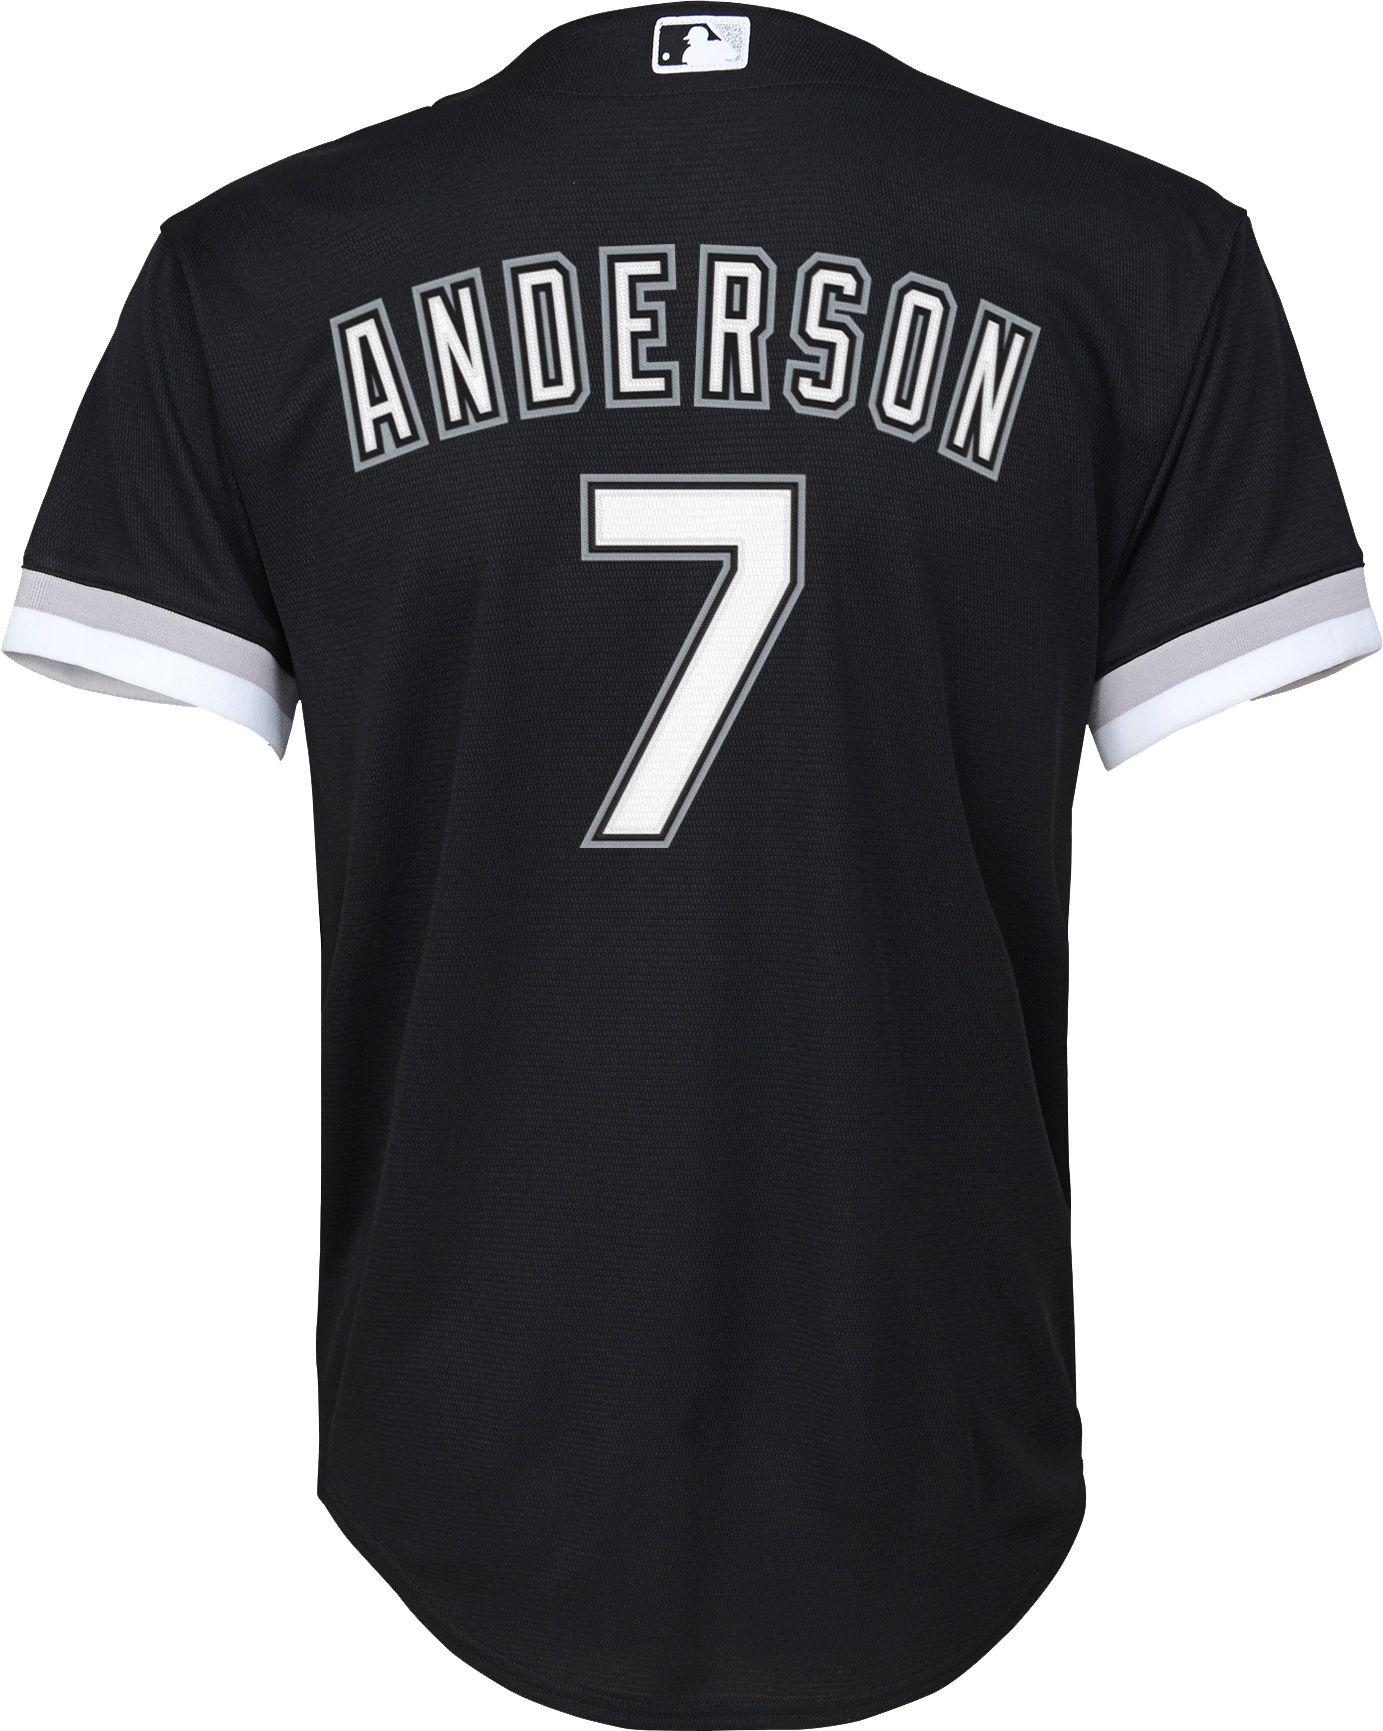 tim anderson youth jersey